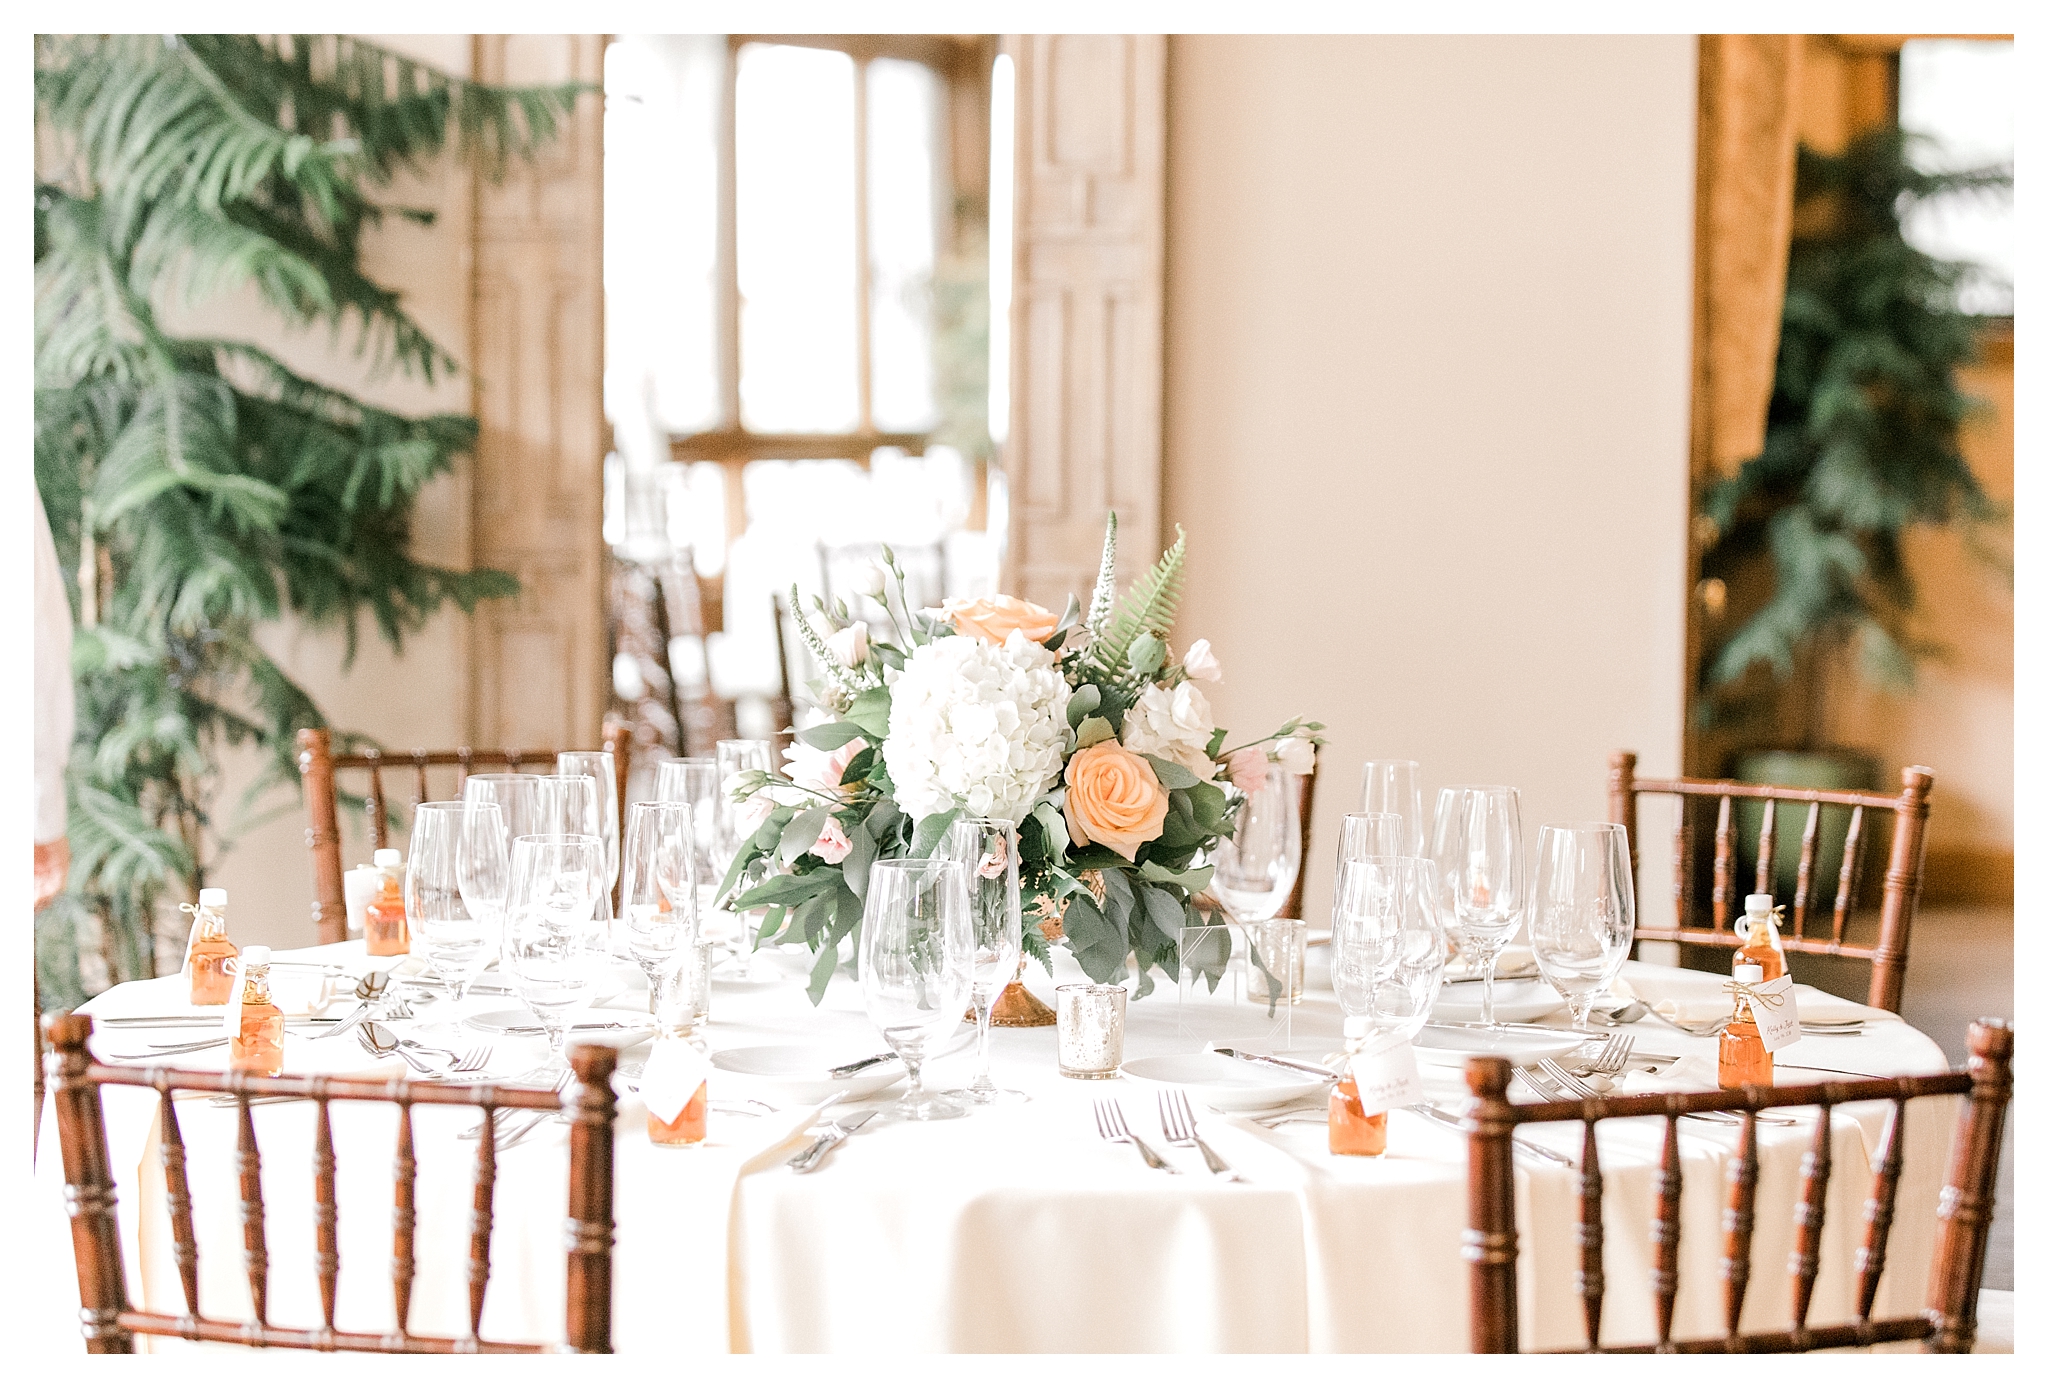 Wedding Decor 10 Central Elements To Consider K Lenox Photography